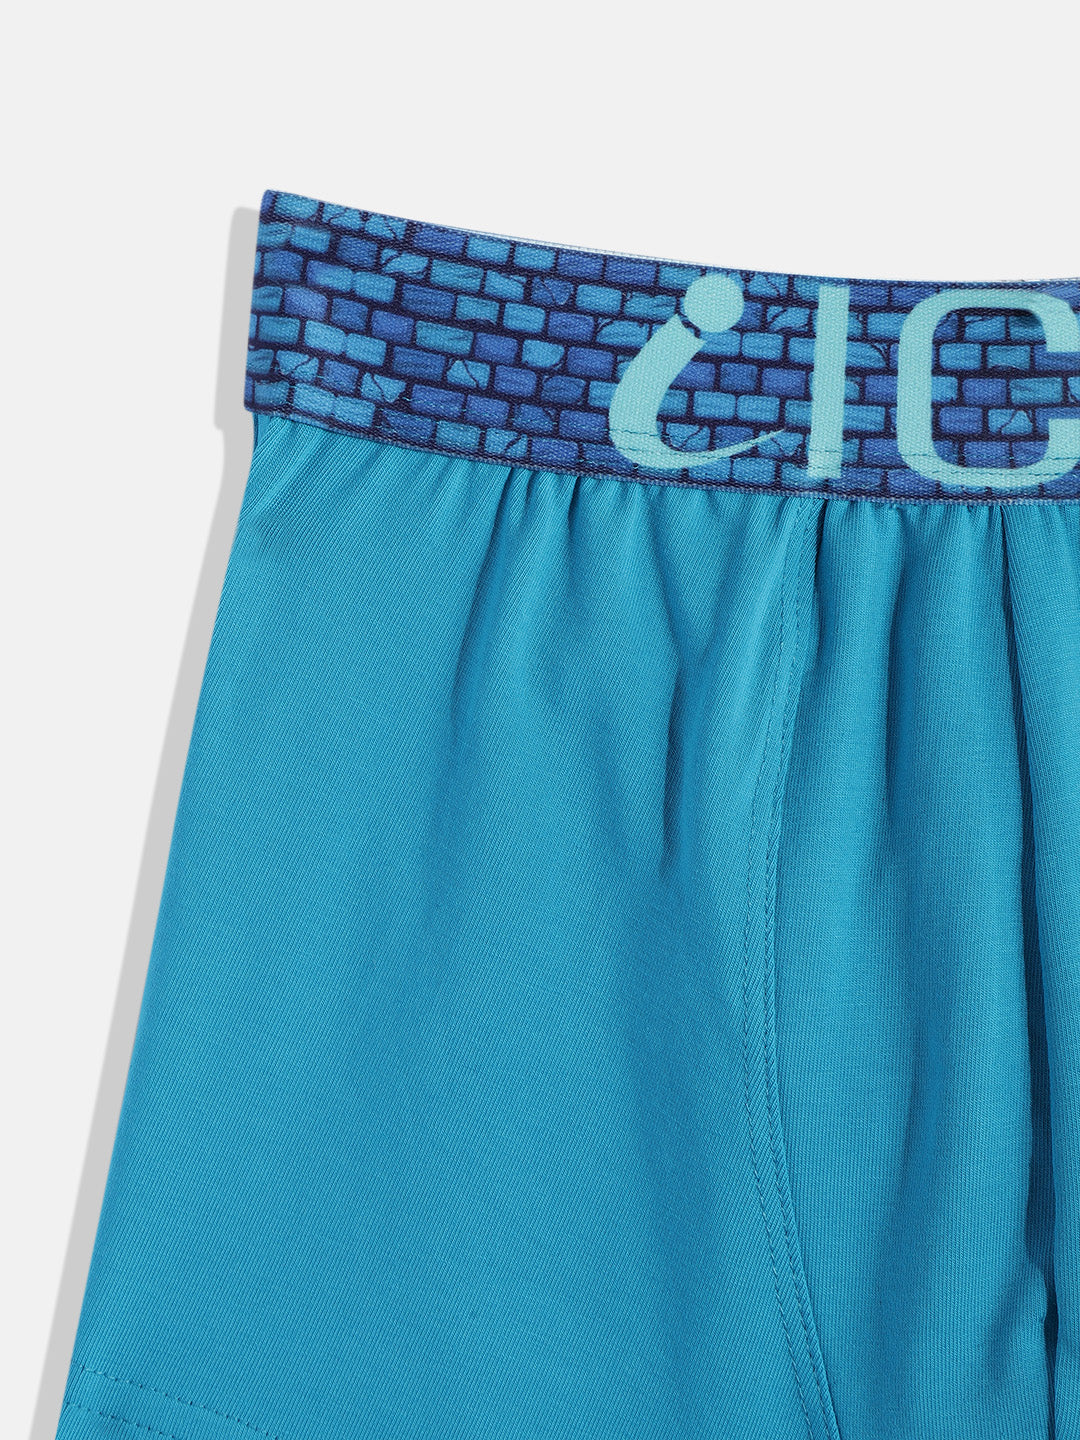 IC4 Boy's Fashion Trunk Combo Pack of 2, Teal Color